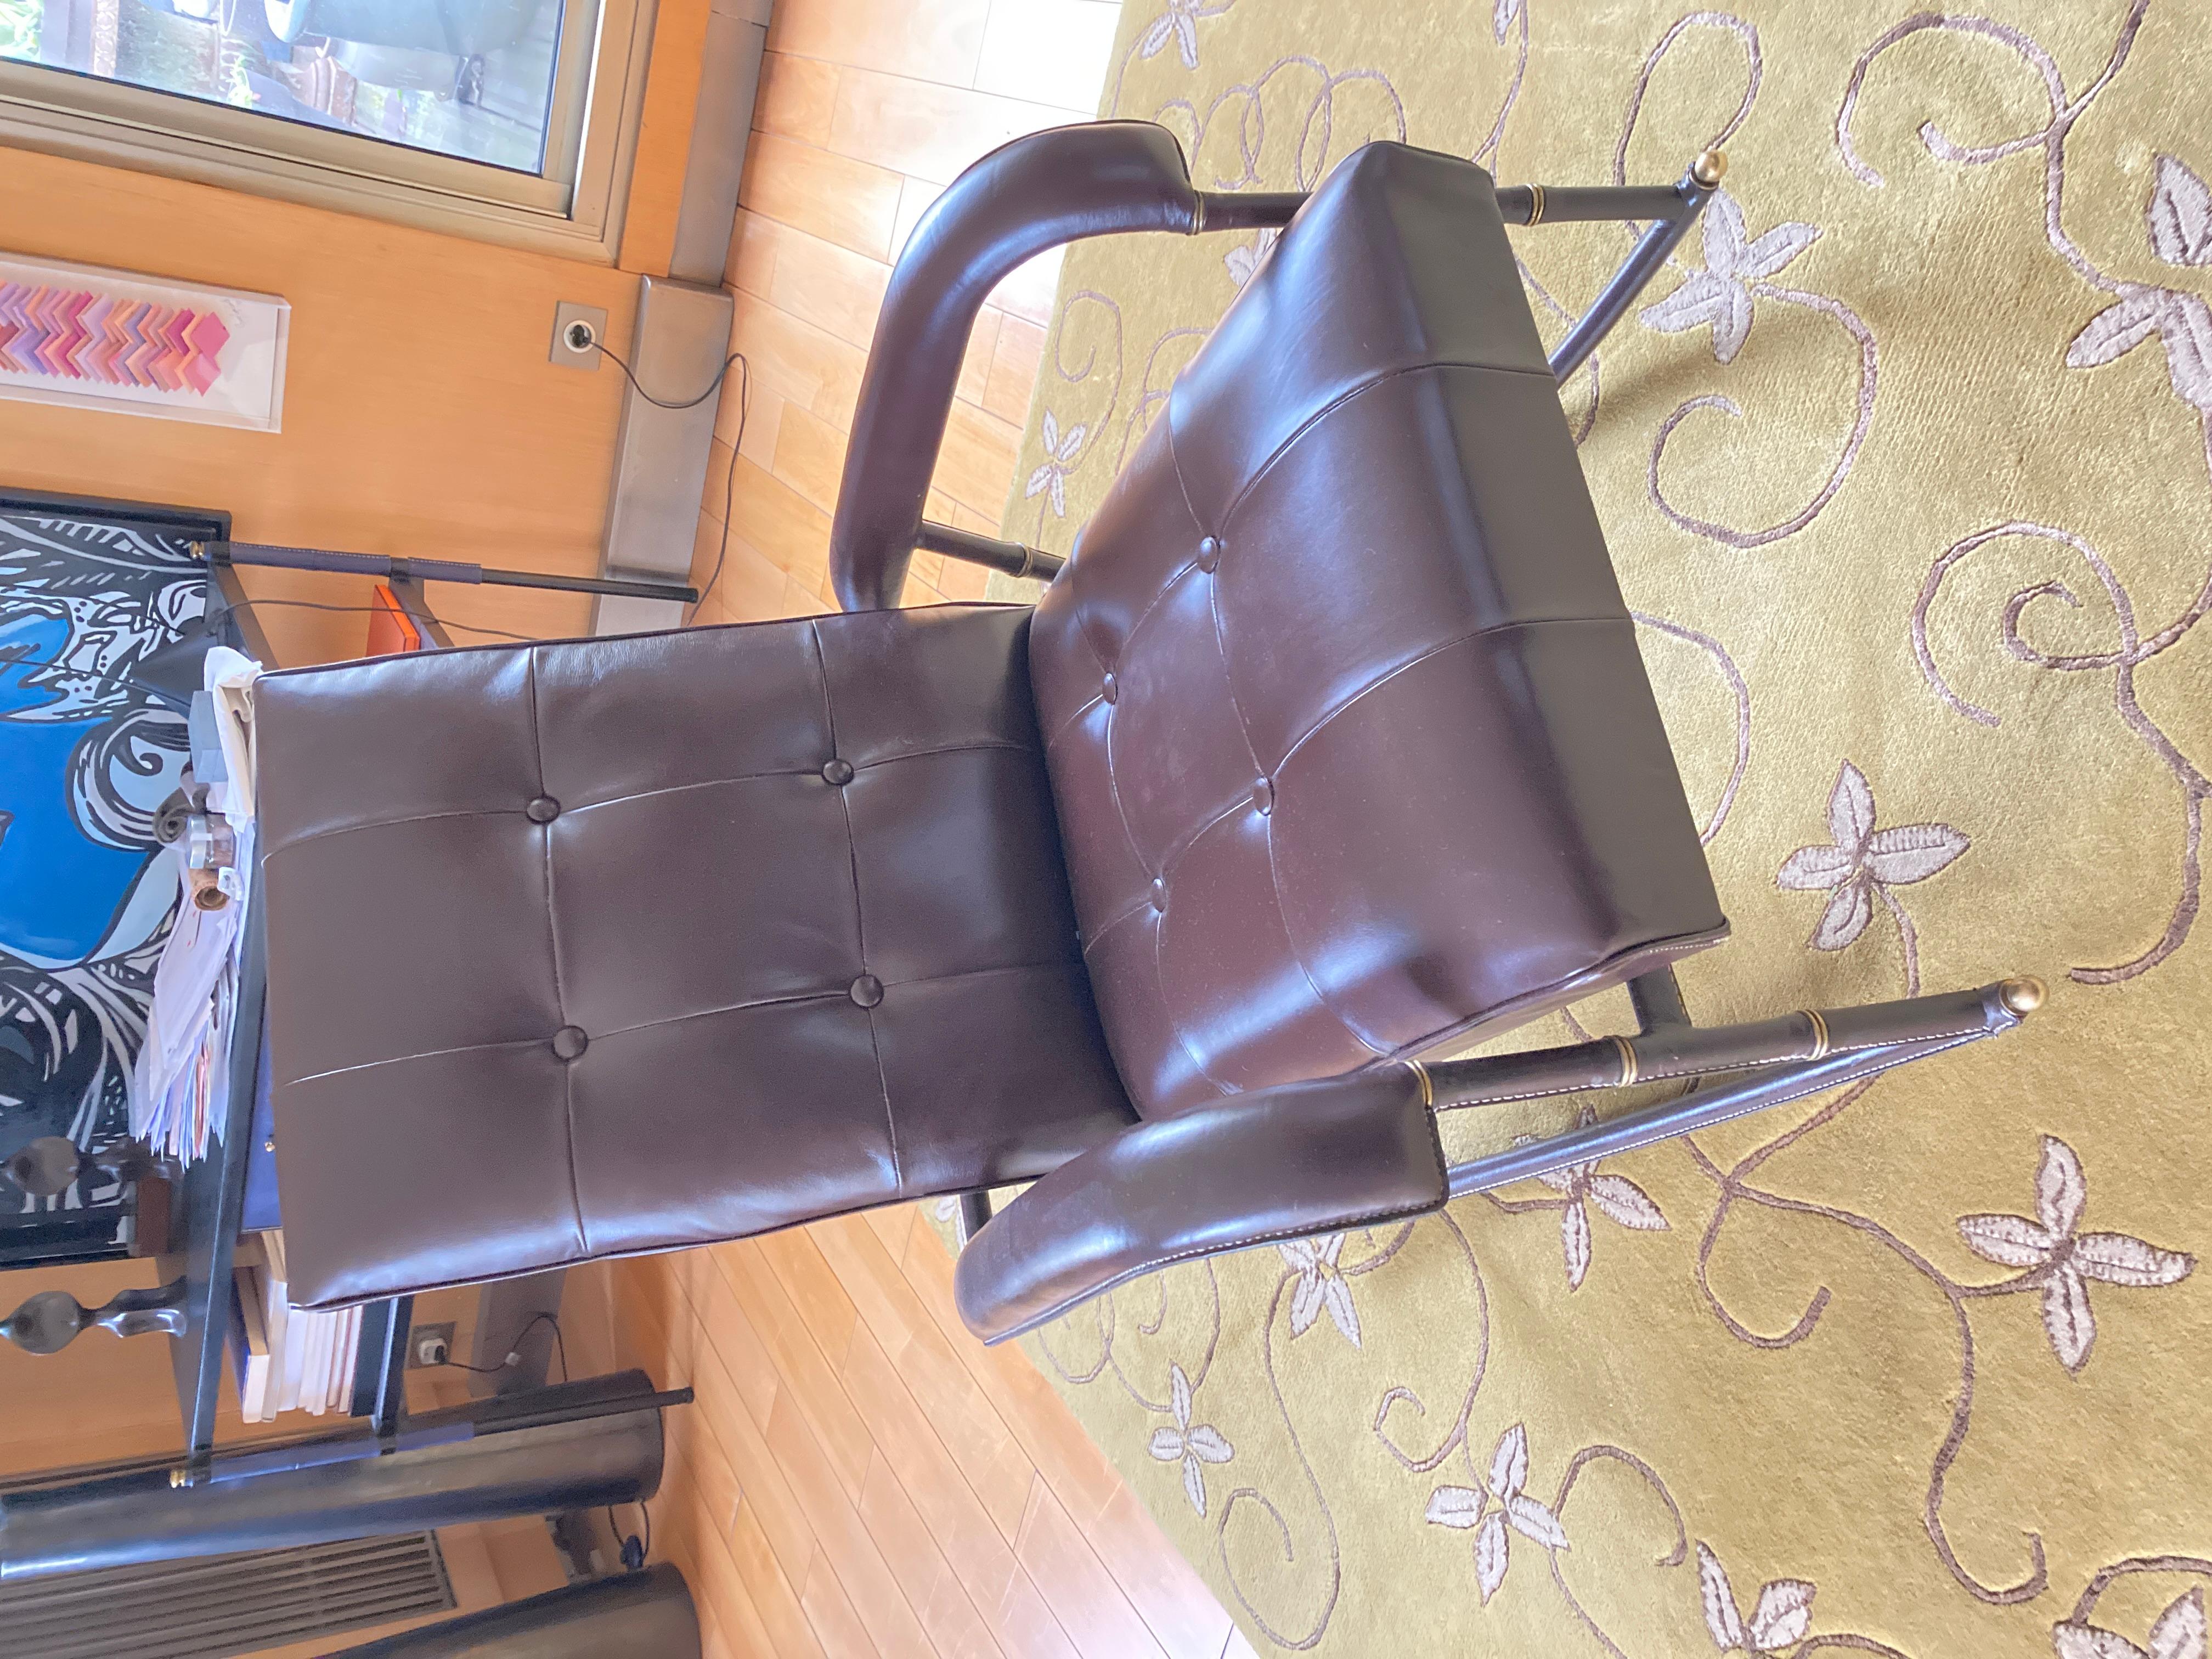 1950's Stitched leather Rocking chair designed by Jacques Adnet
Nice chocolate brown color 
France